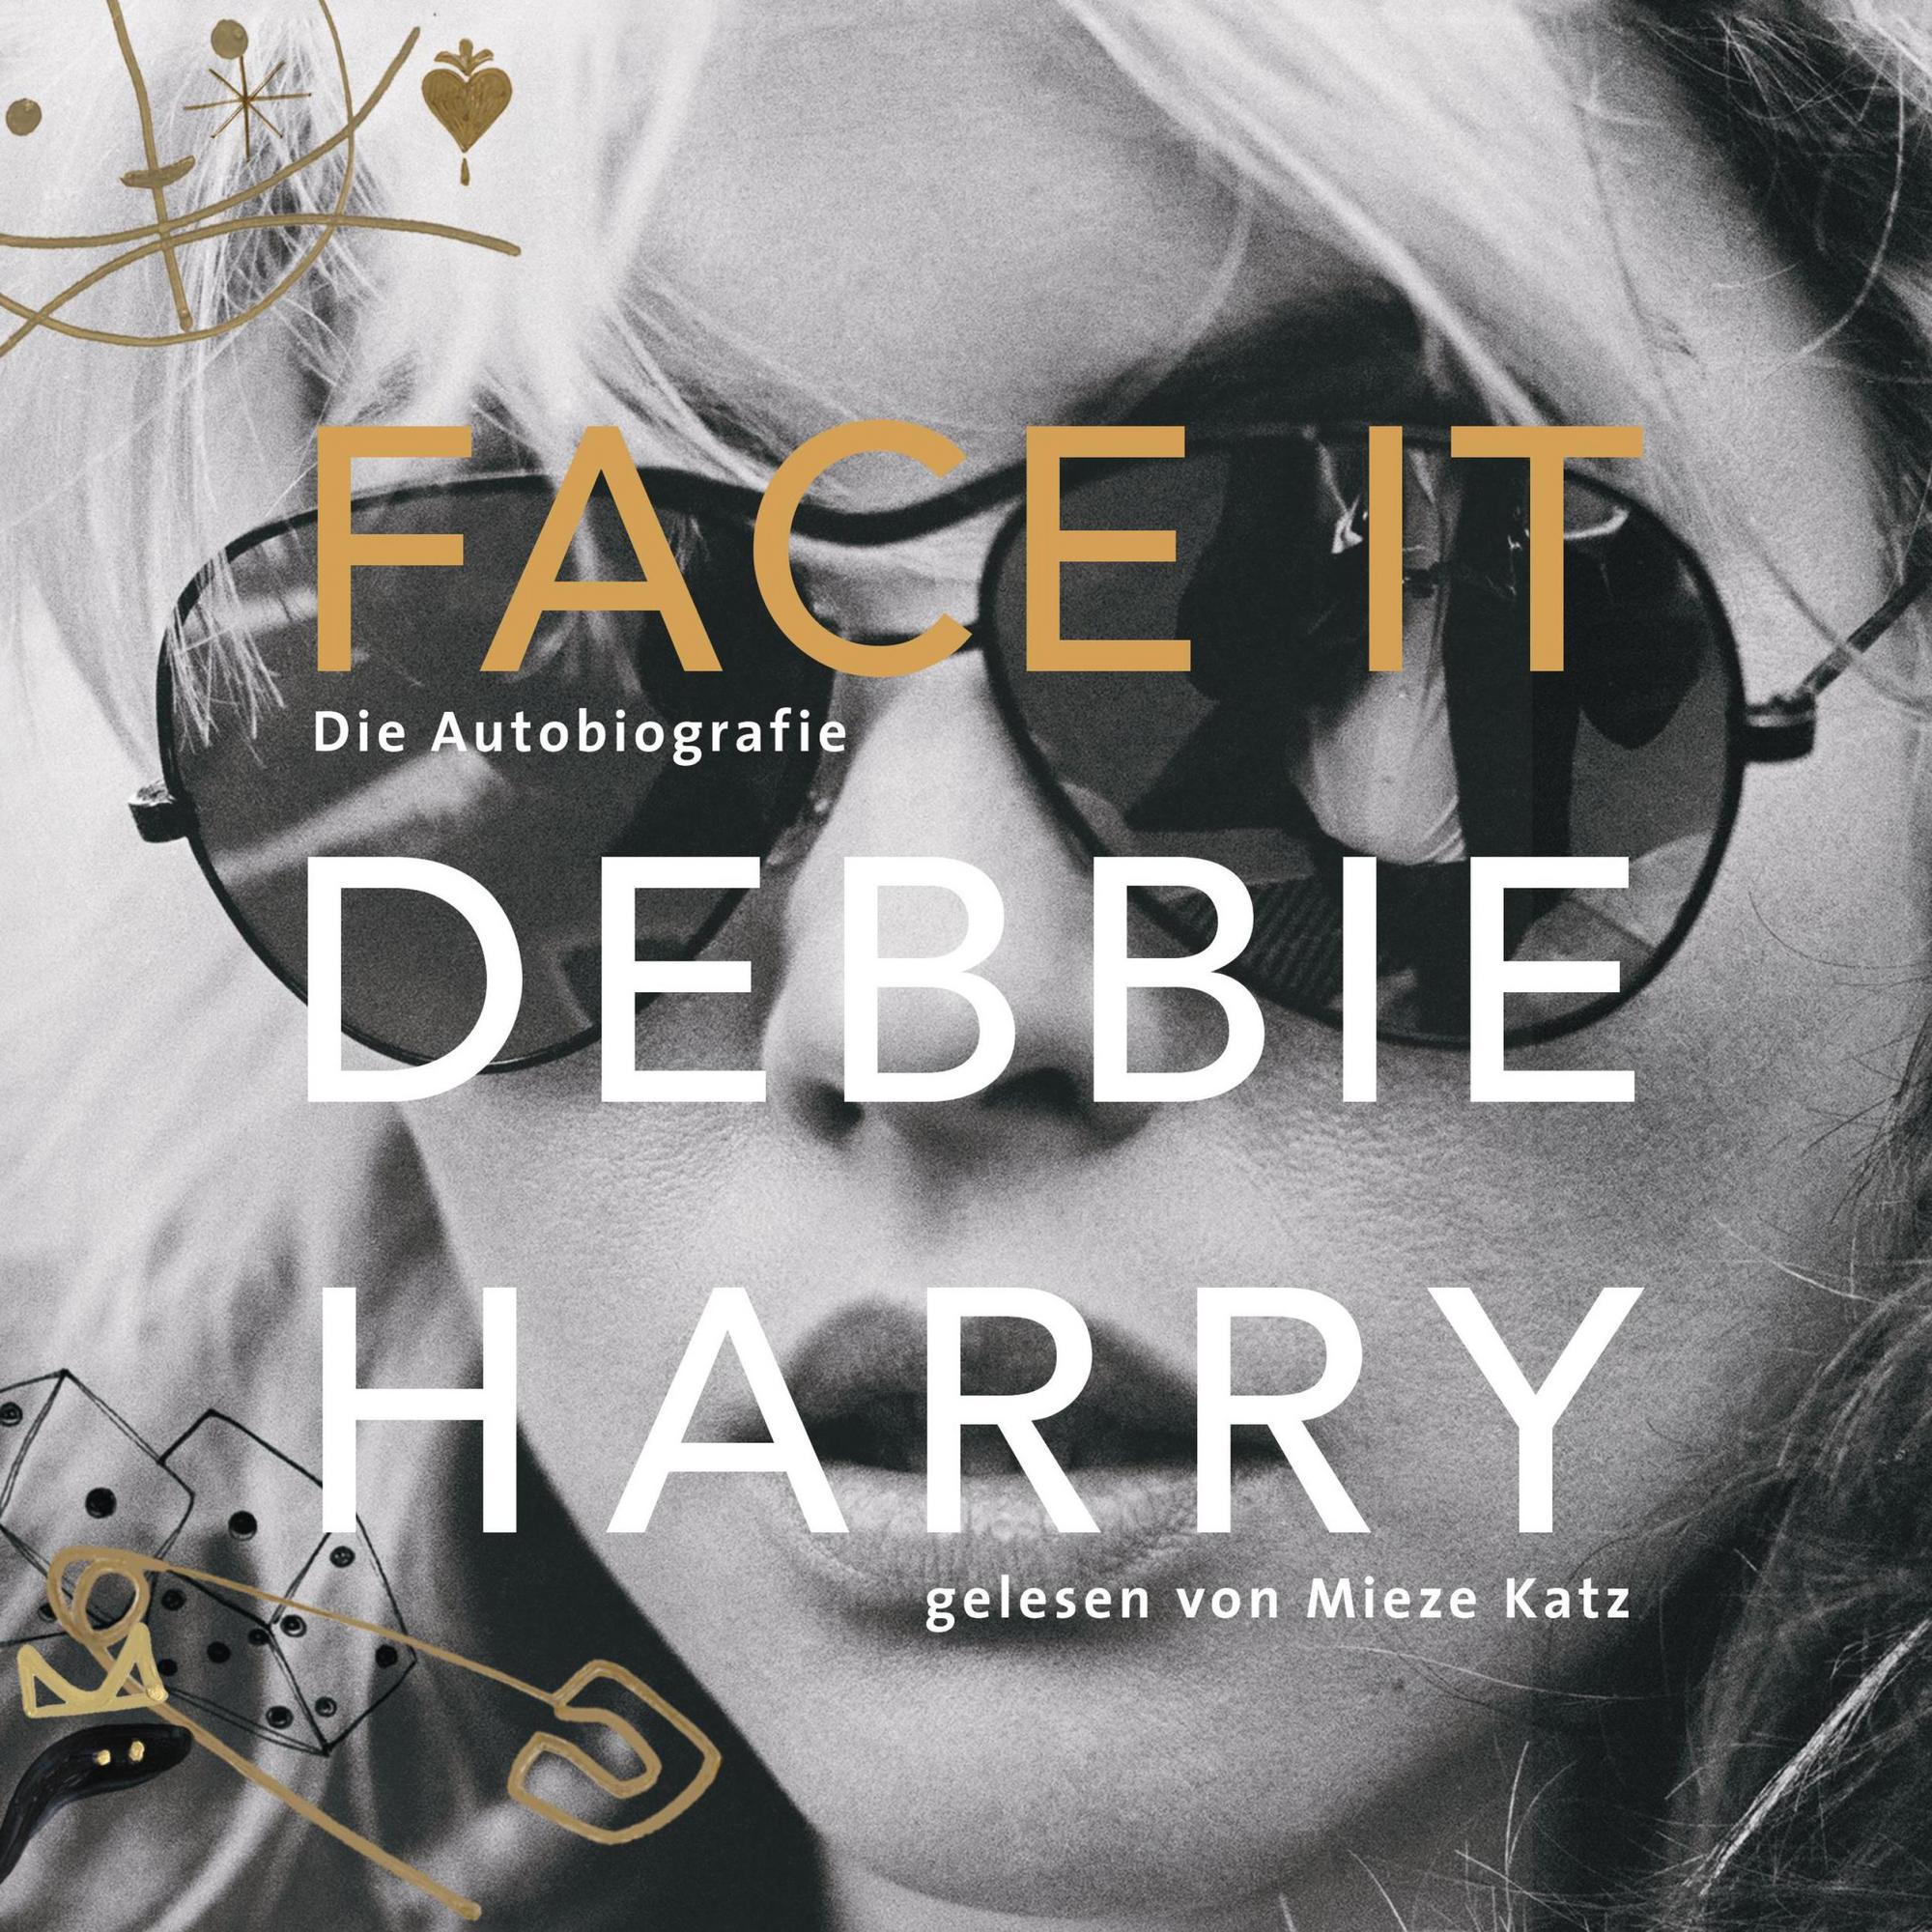 Debbie Harry - Face it (Hörbuch-Cover)